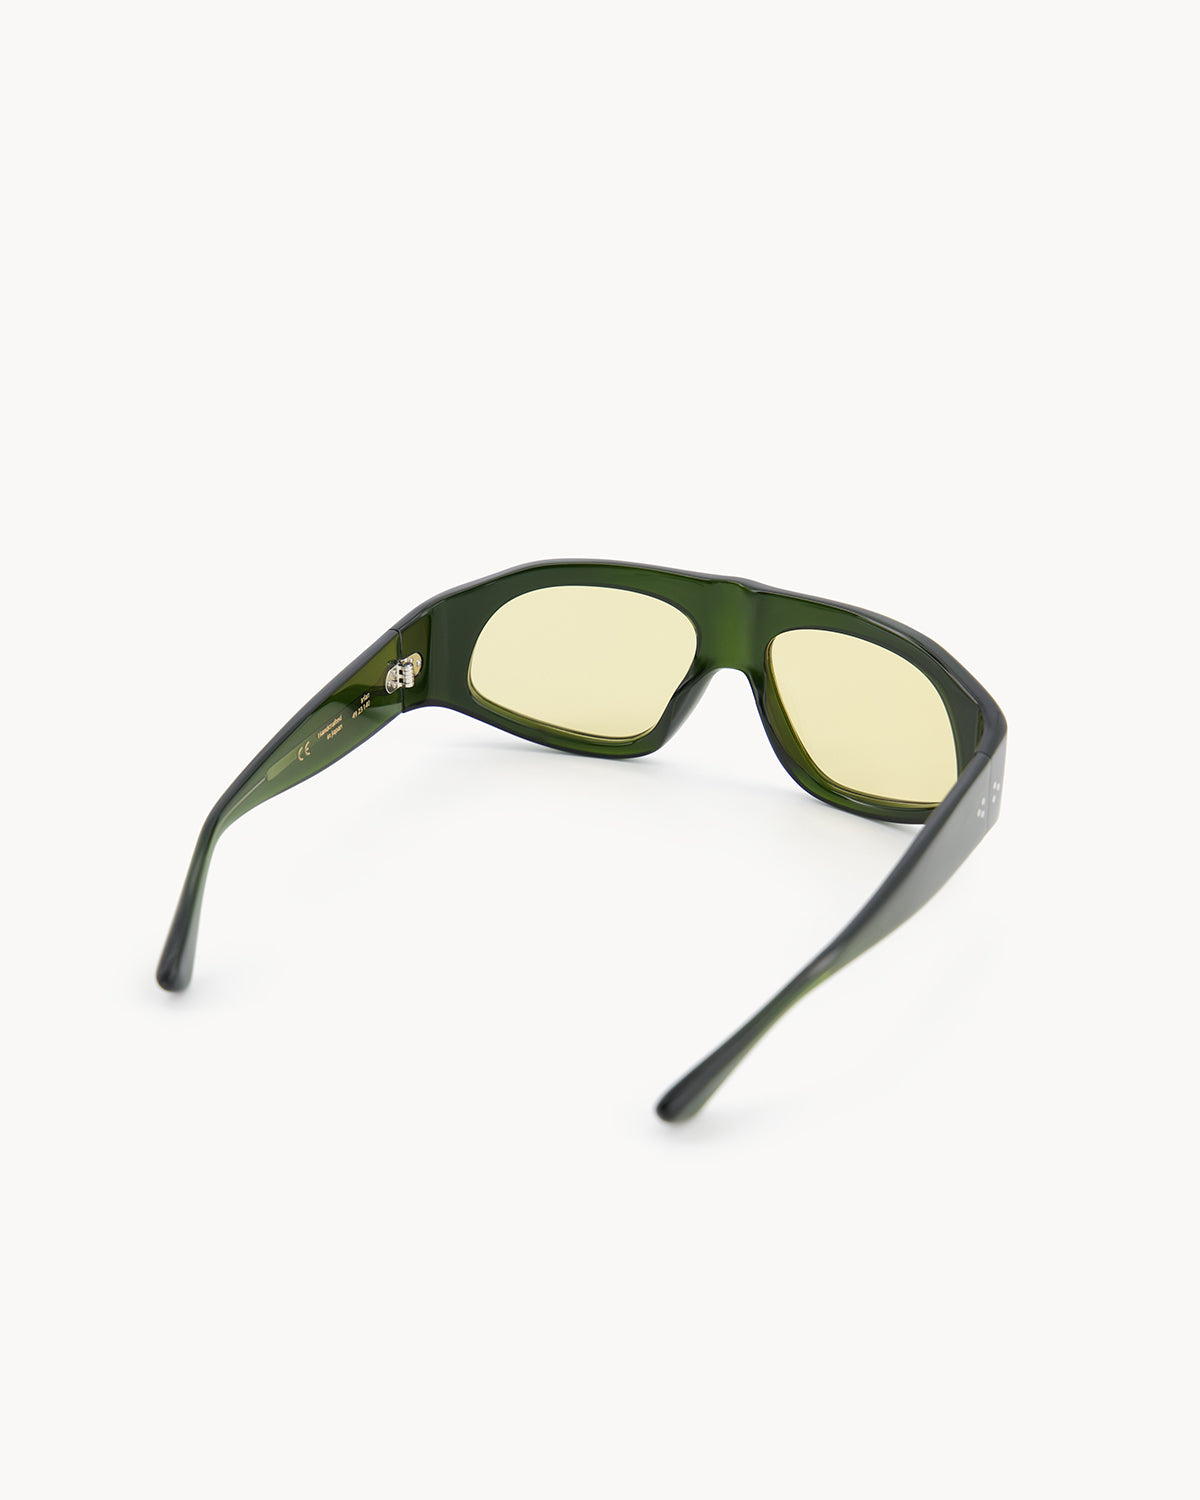 Port Tanger Irfan Sunglasses in Cardamom Acetate and Warm Olive Lenses 3